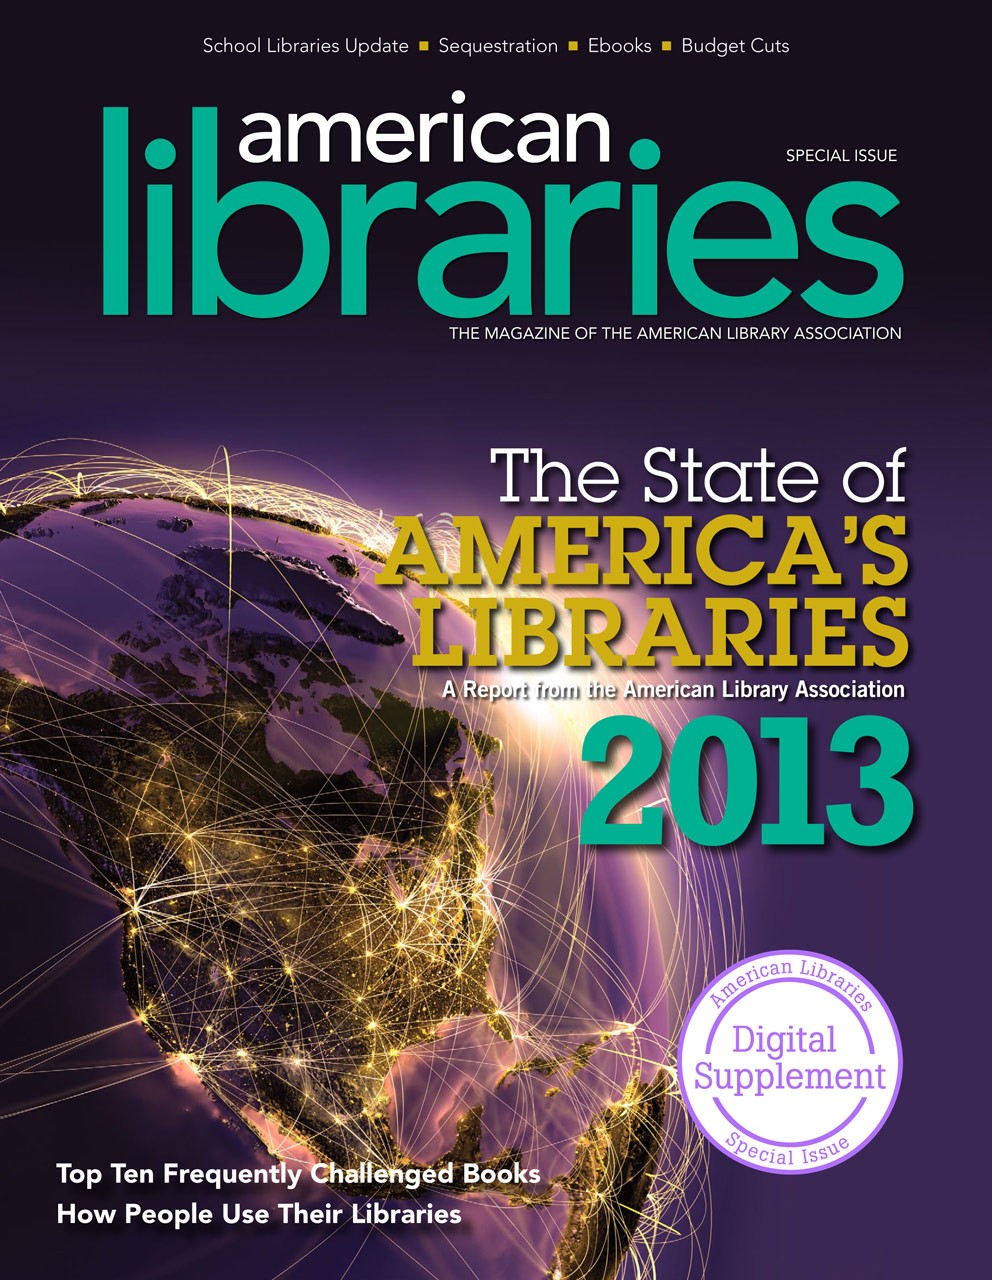 cover-stateoflibraries2013.jpg